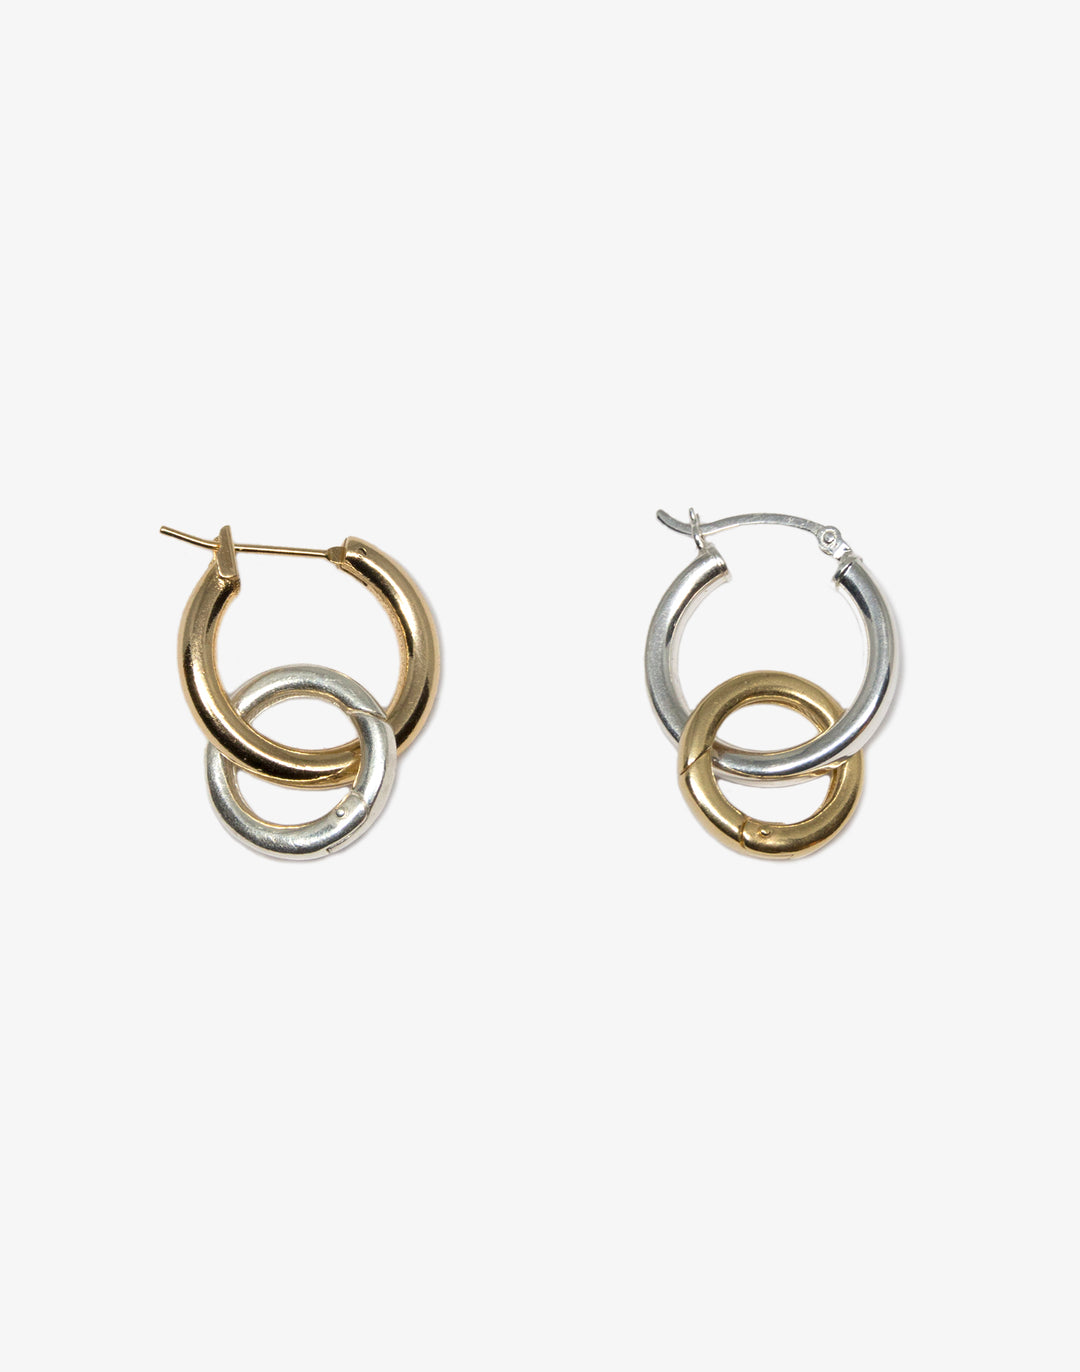 llayers Silver gold two tone unisex hoops earring minimal jewelry Made In Brooklyn New York